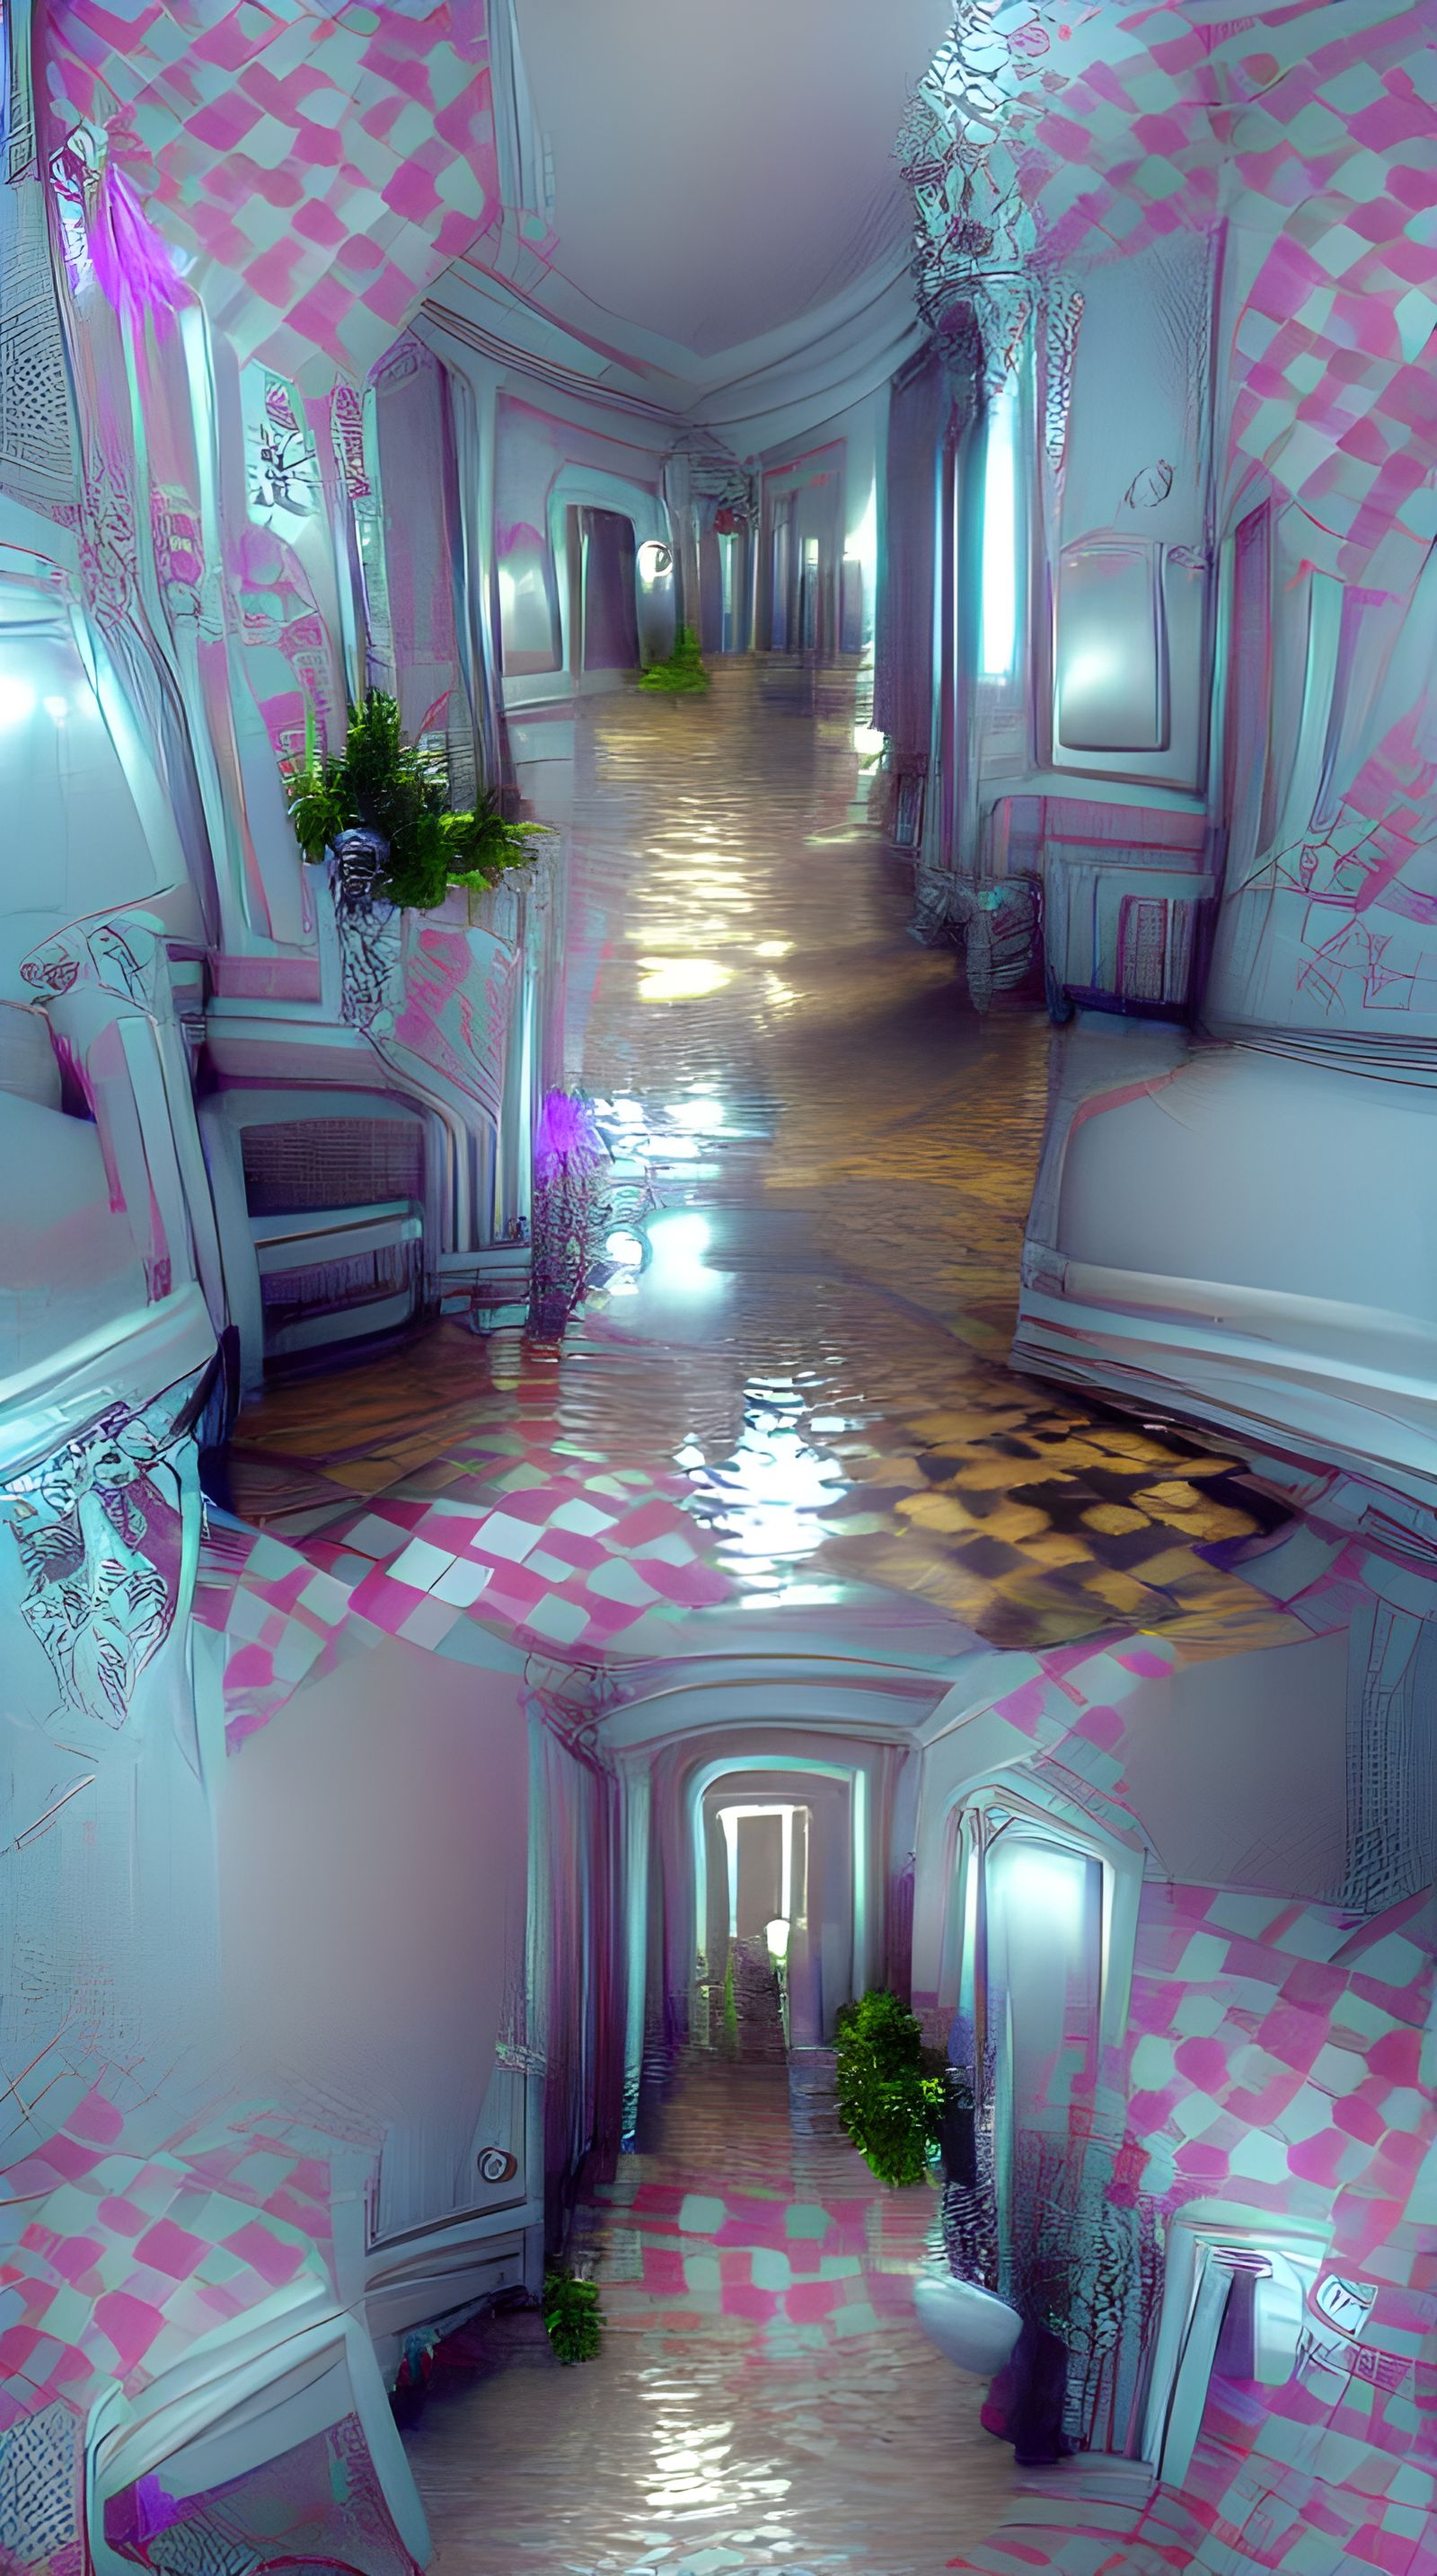 Flooded rococo aesthetic hallway with checkered floors.